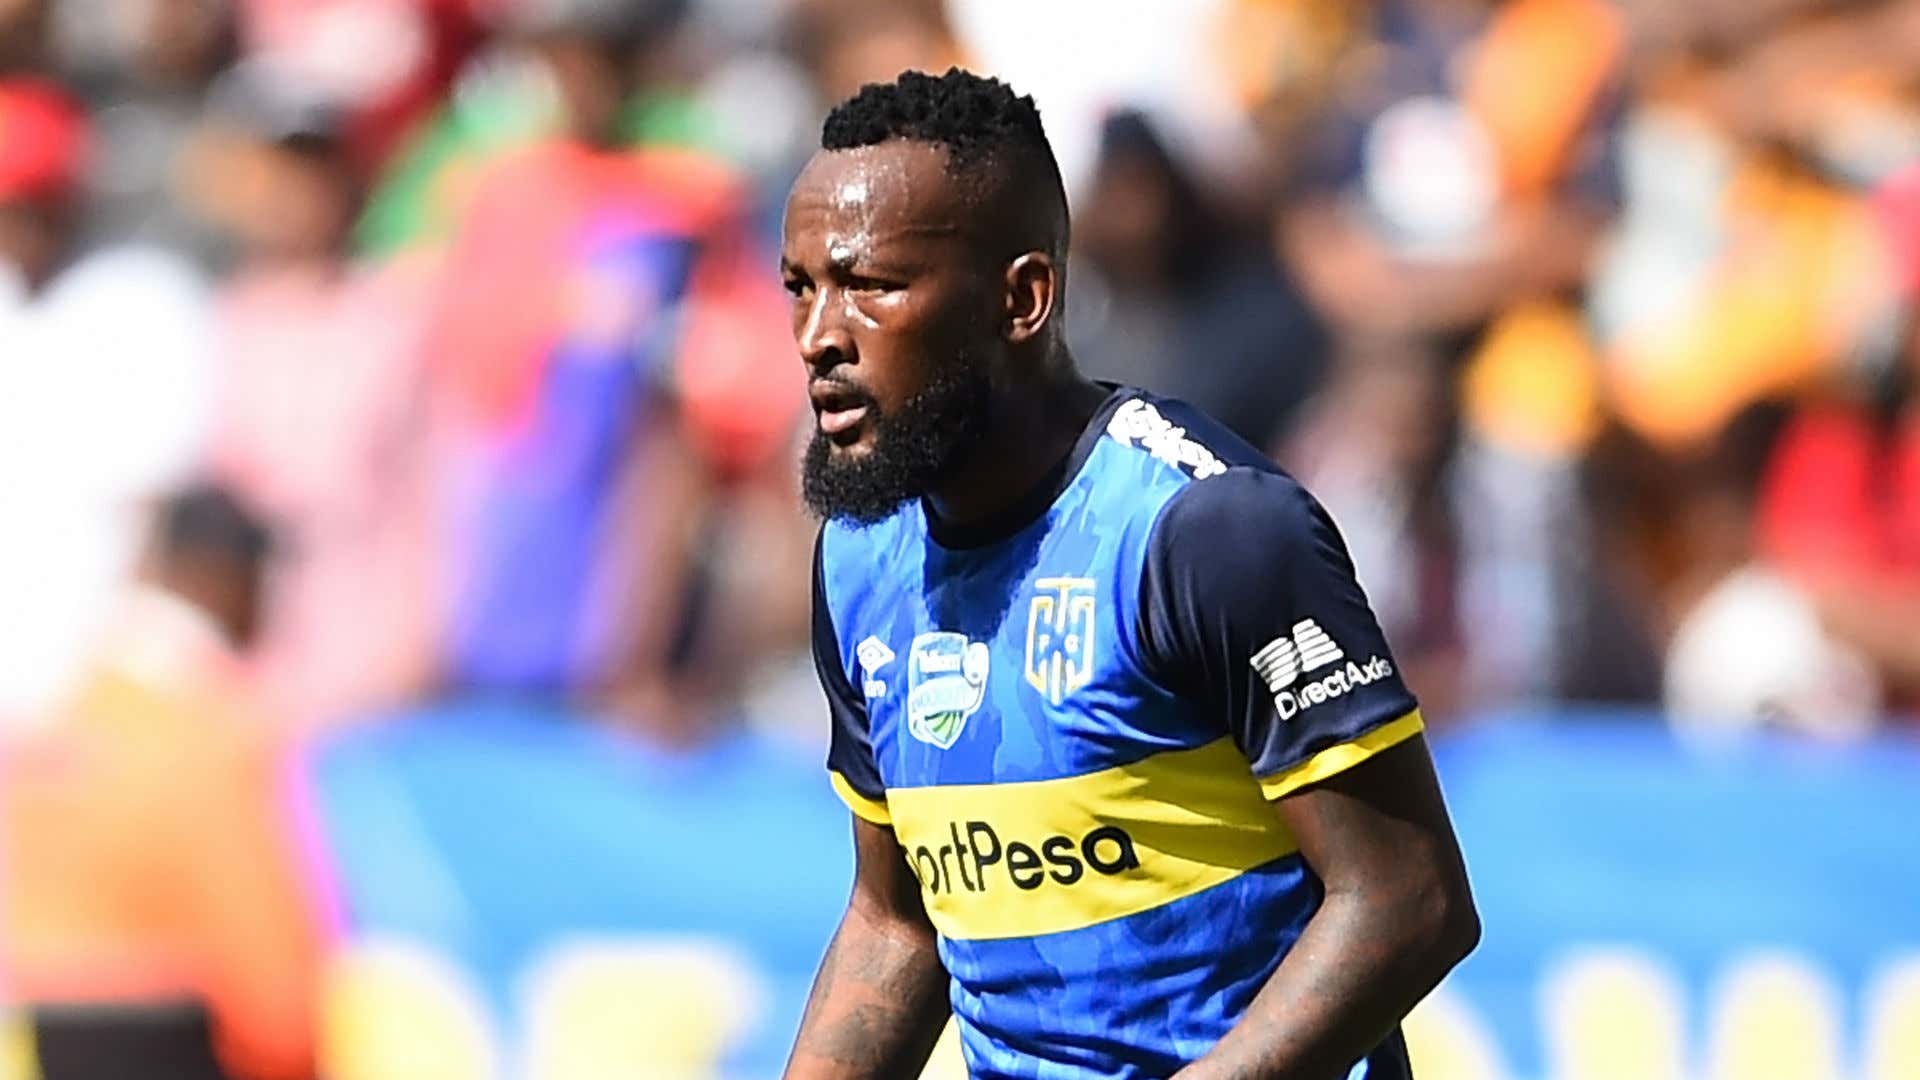 Photo of Looming trouble for Cape Town City’s Makola? PSL studying footage over claims midfielder pushed referee